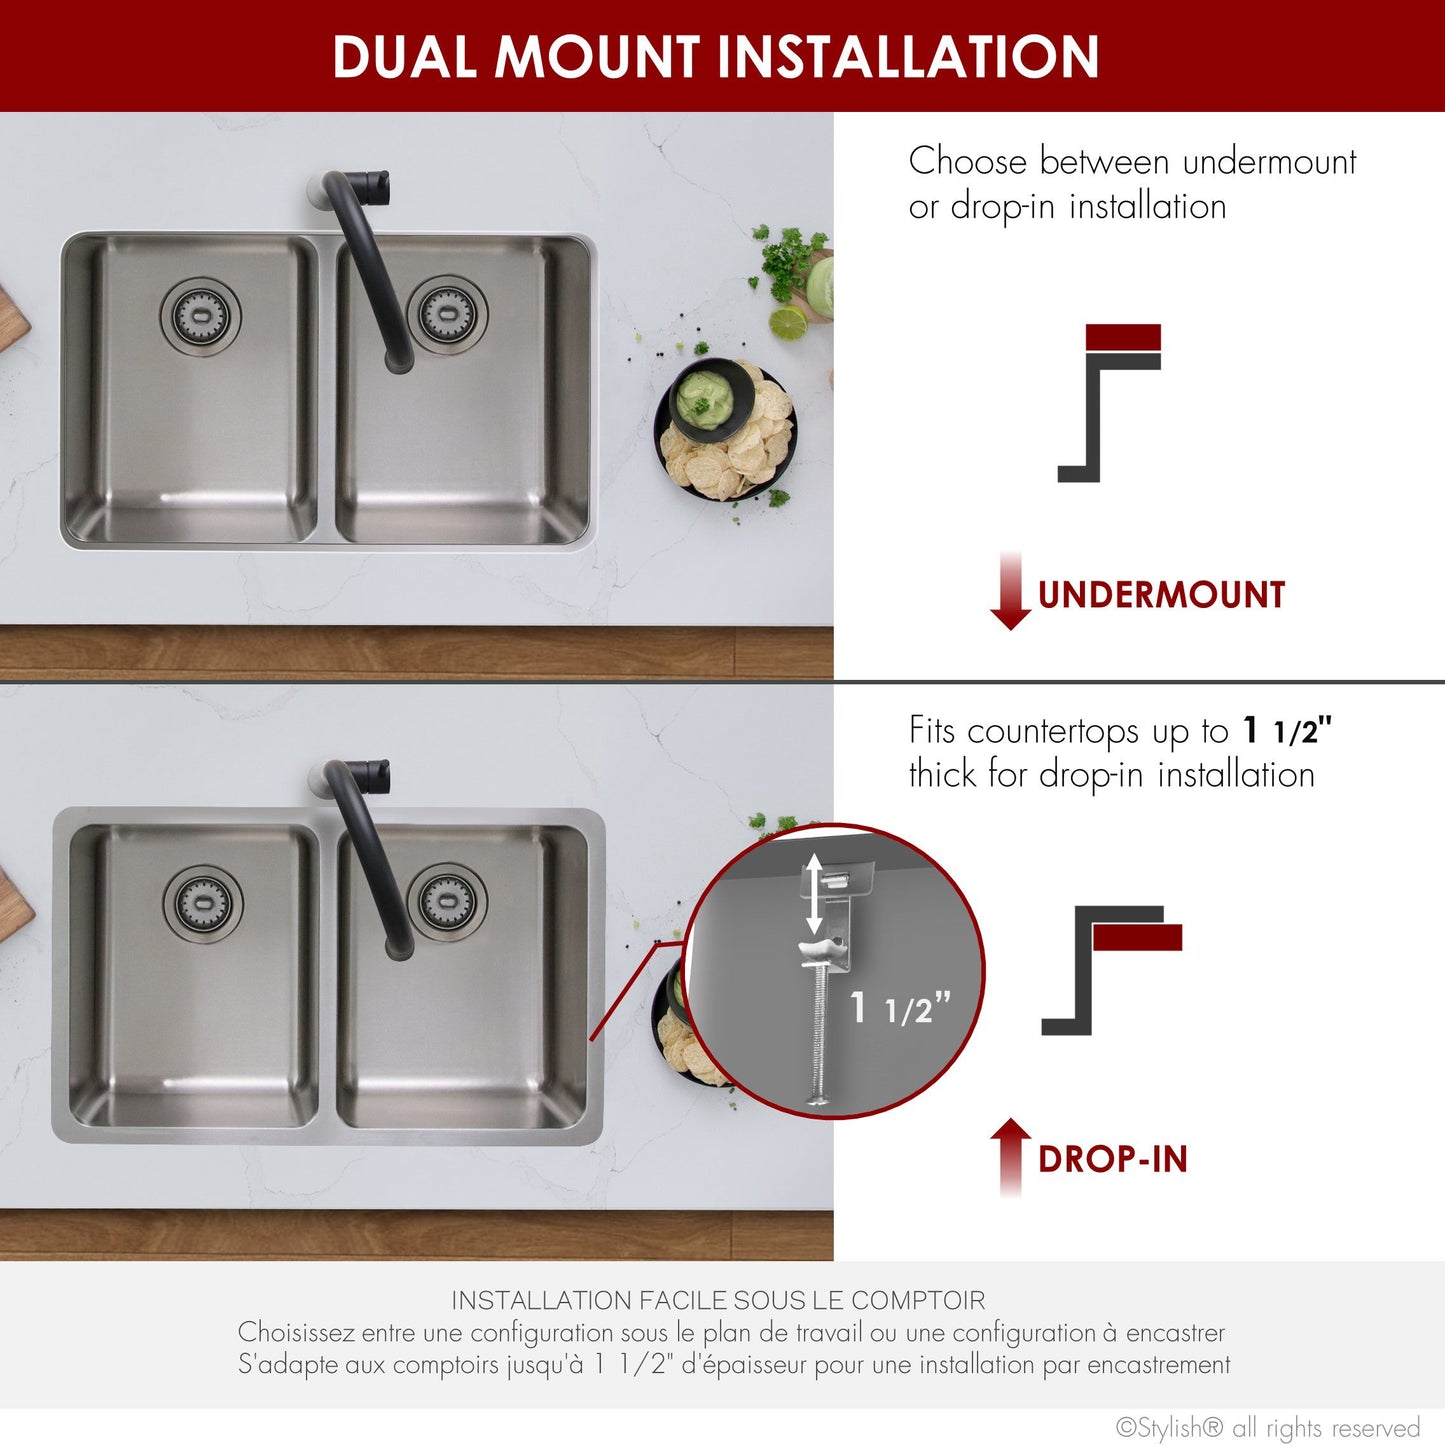 Stylish 29" Double Bowl Undermount and Drop-in Stainless Steel Kitchen Sink (S-414T)